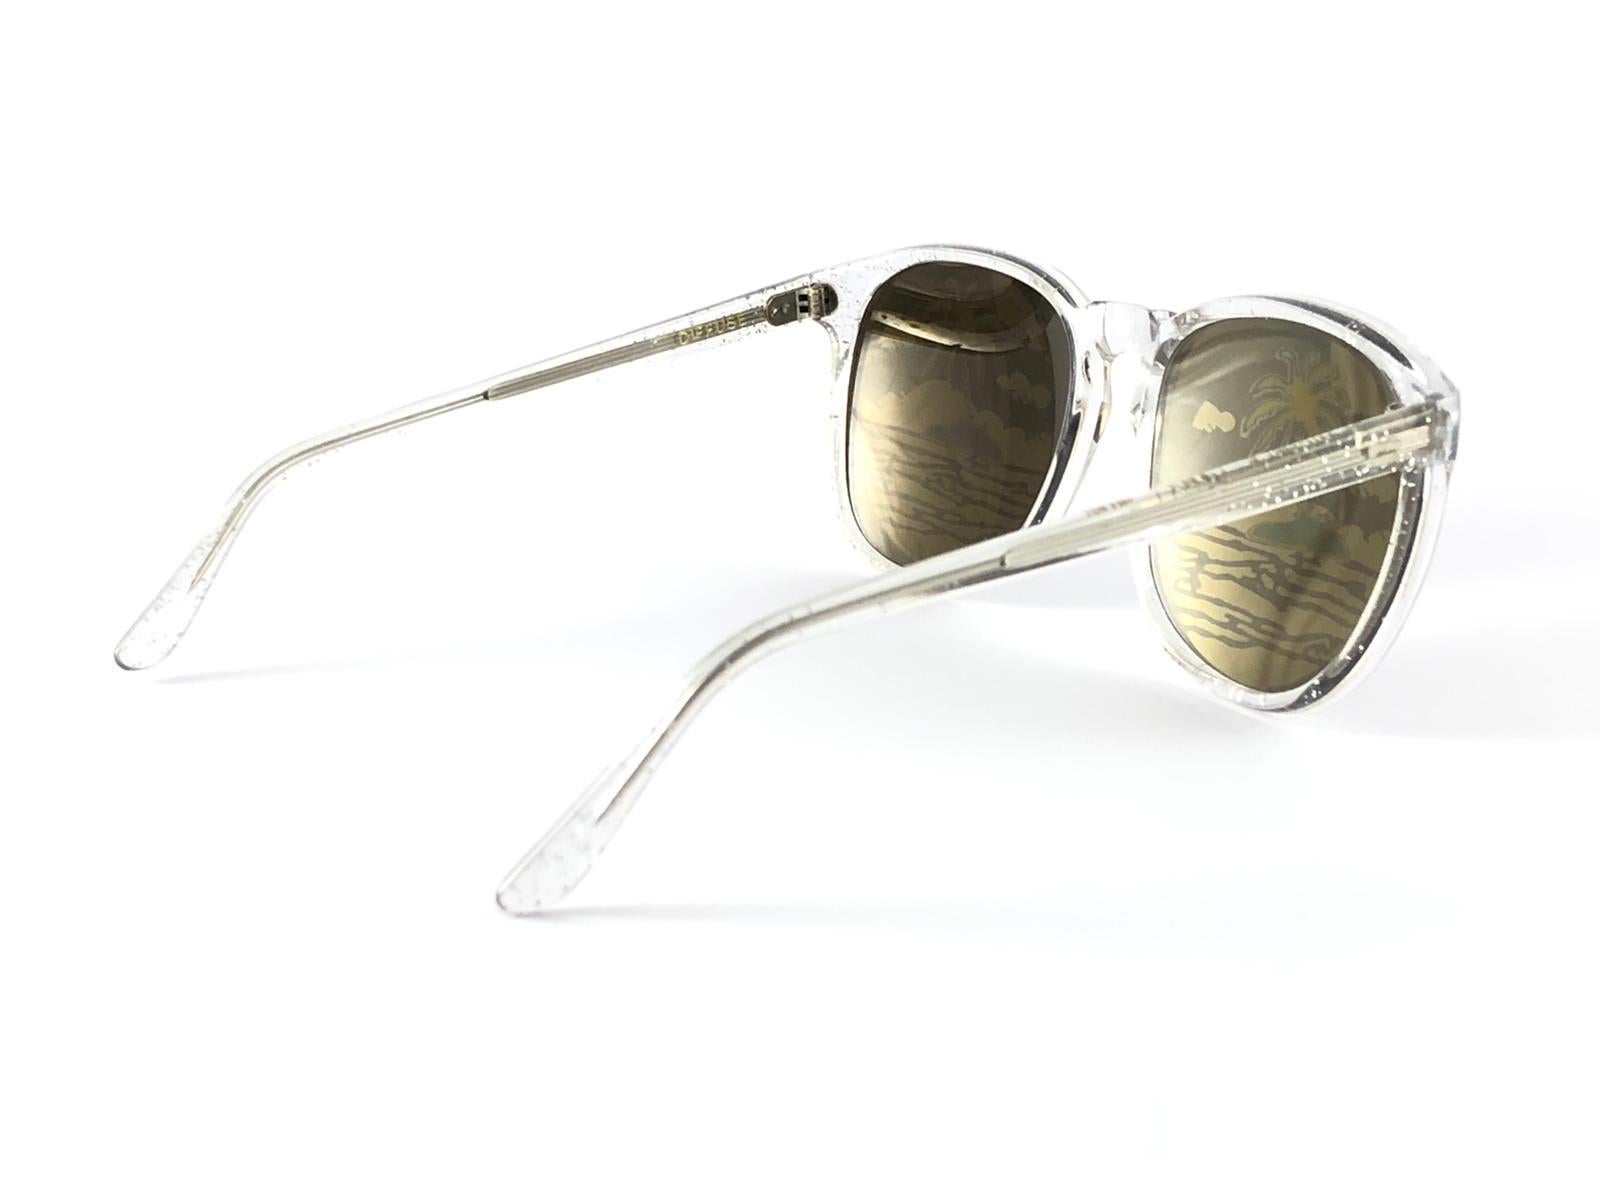 New Vintage Michele Lamy Translucent Frame Mirror Print Rick Owens Sunglasses  In New Condition For Sale In Baleares, Baleares